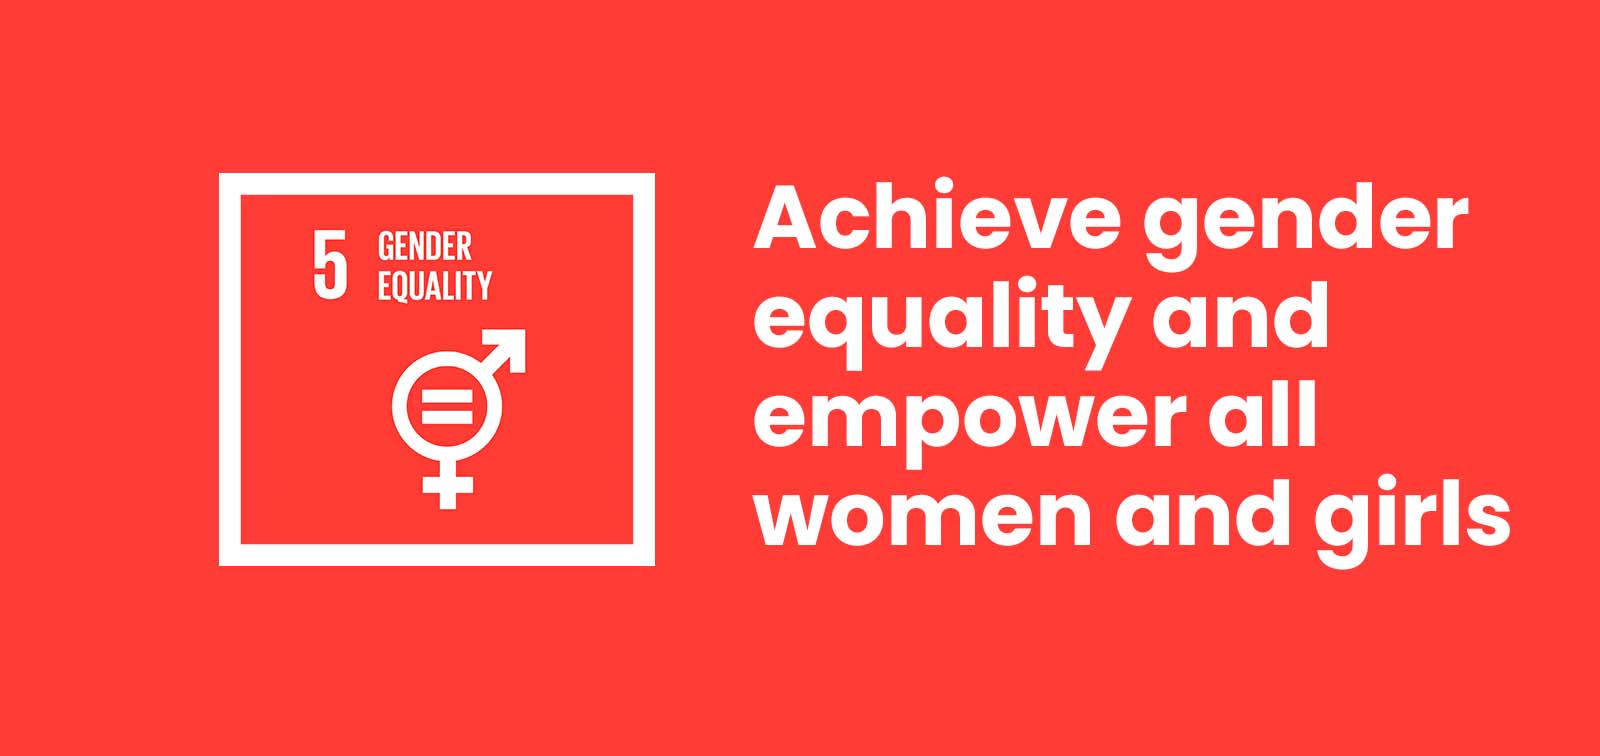 SDG Goal 5 – Achieve Gender Equality and Empower All Women and